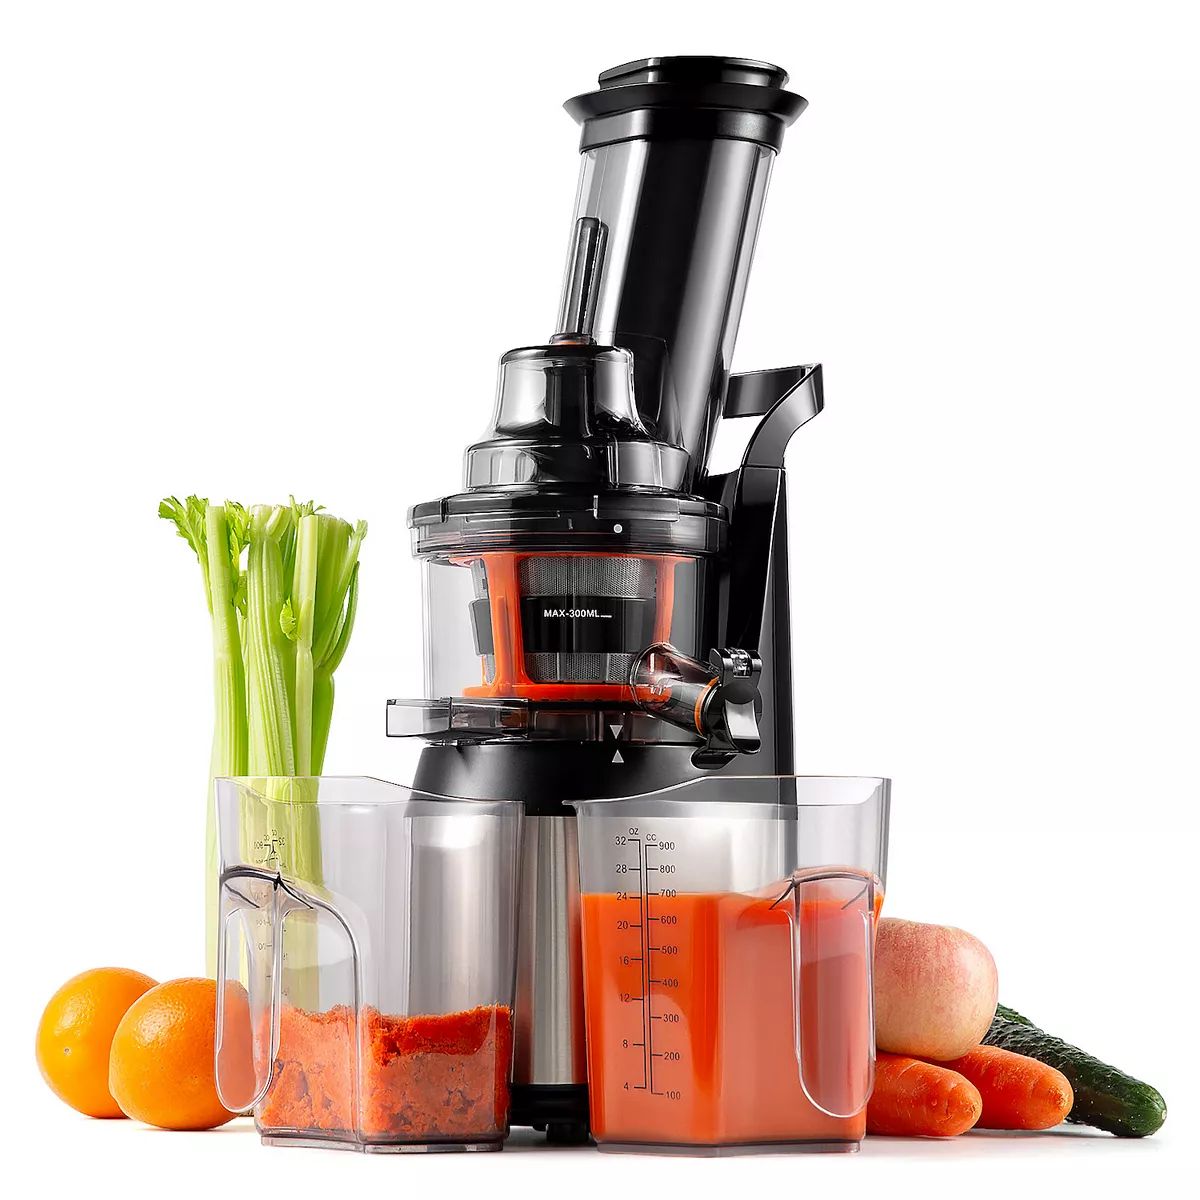 Ventray 408 Slow Speed Press Masticating Juicer, Compact Cold Press Juice Extractor,  BPA-Free | Kohl's